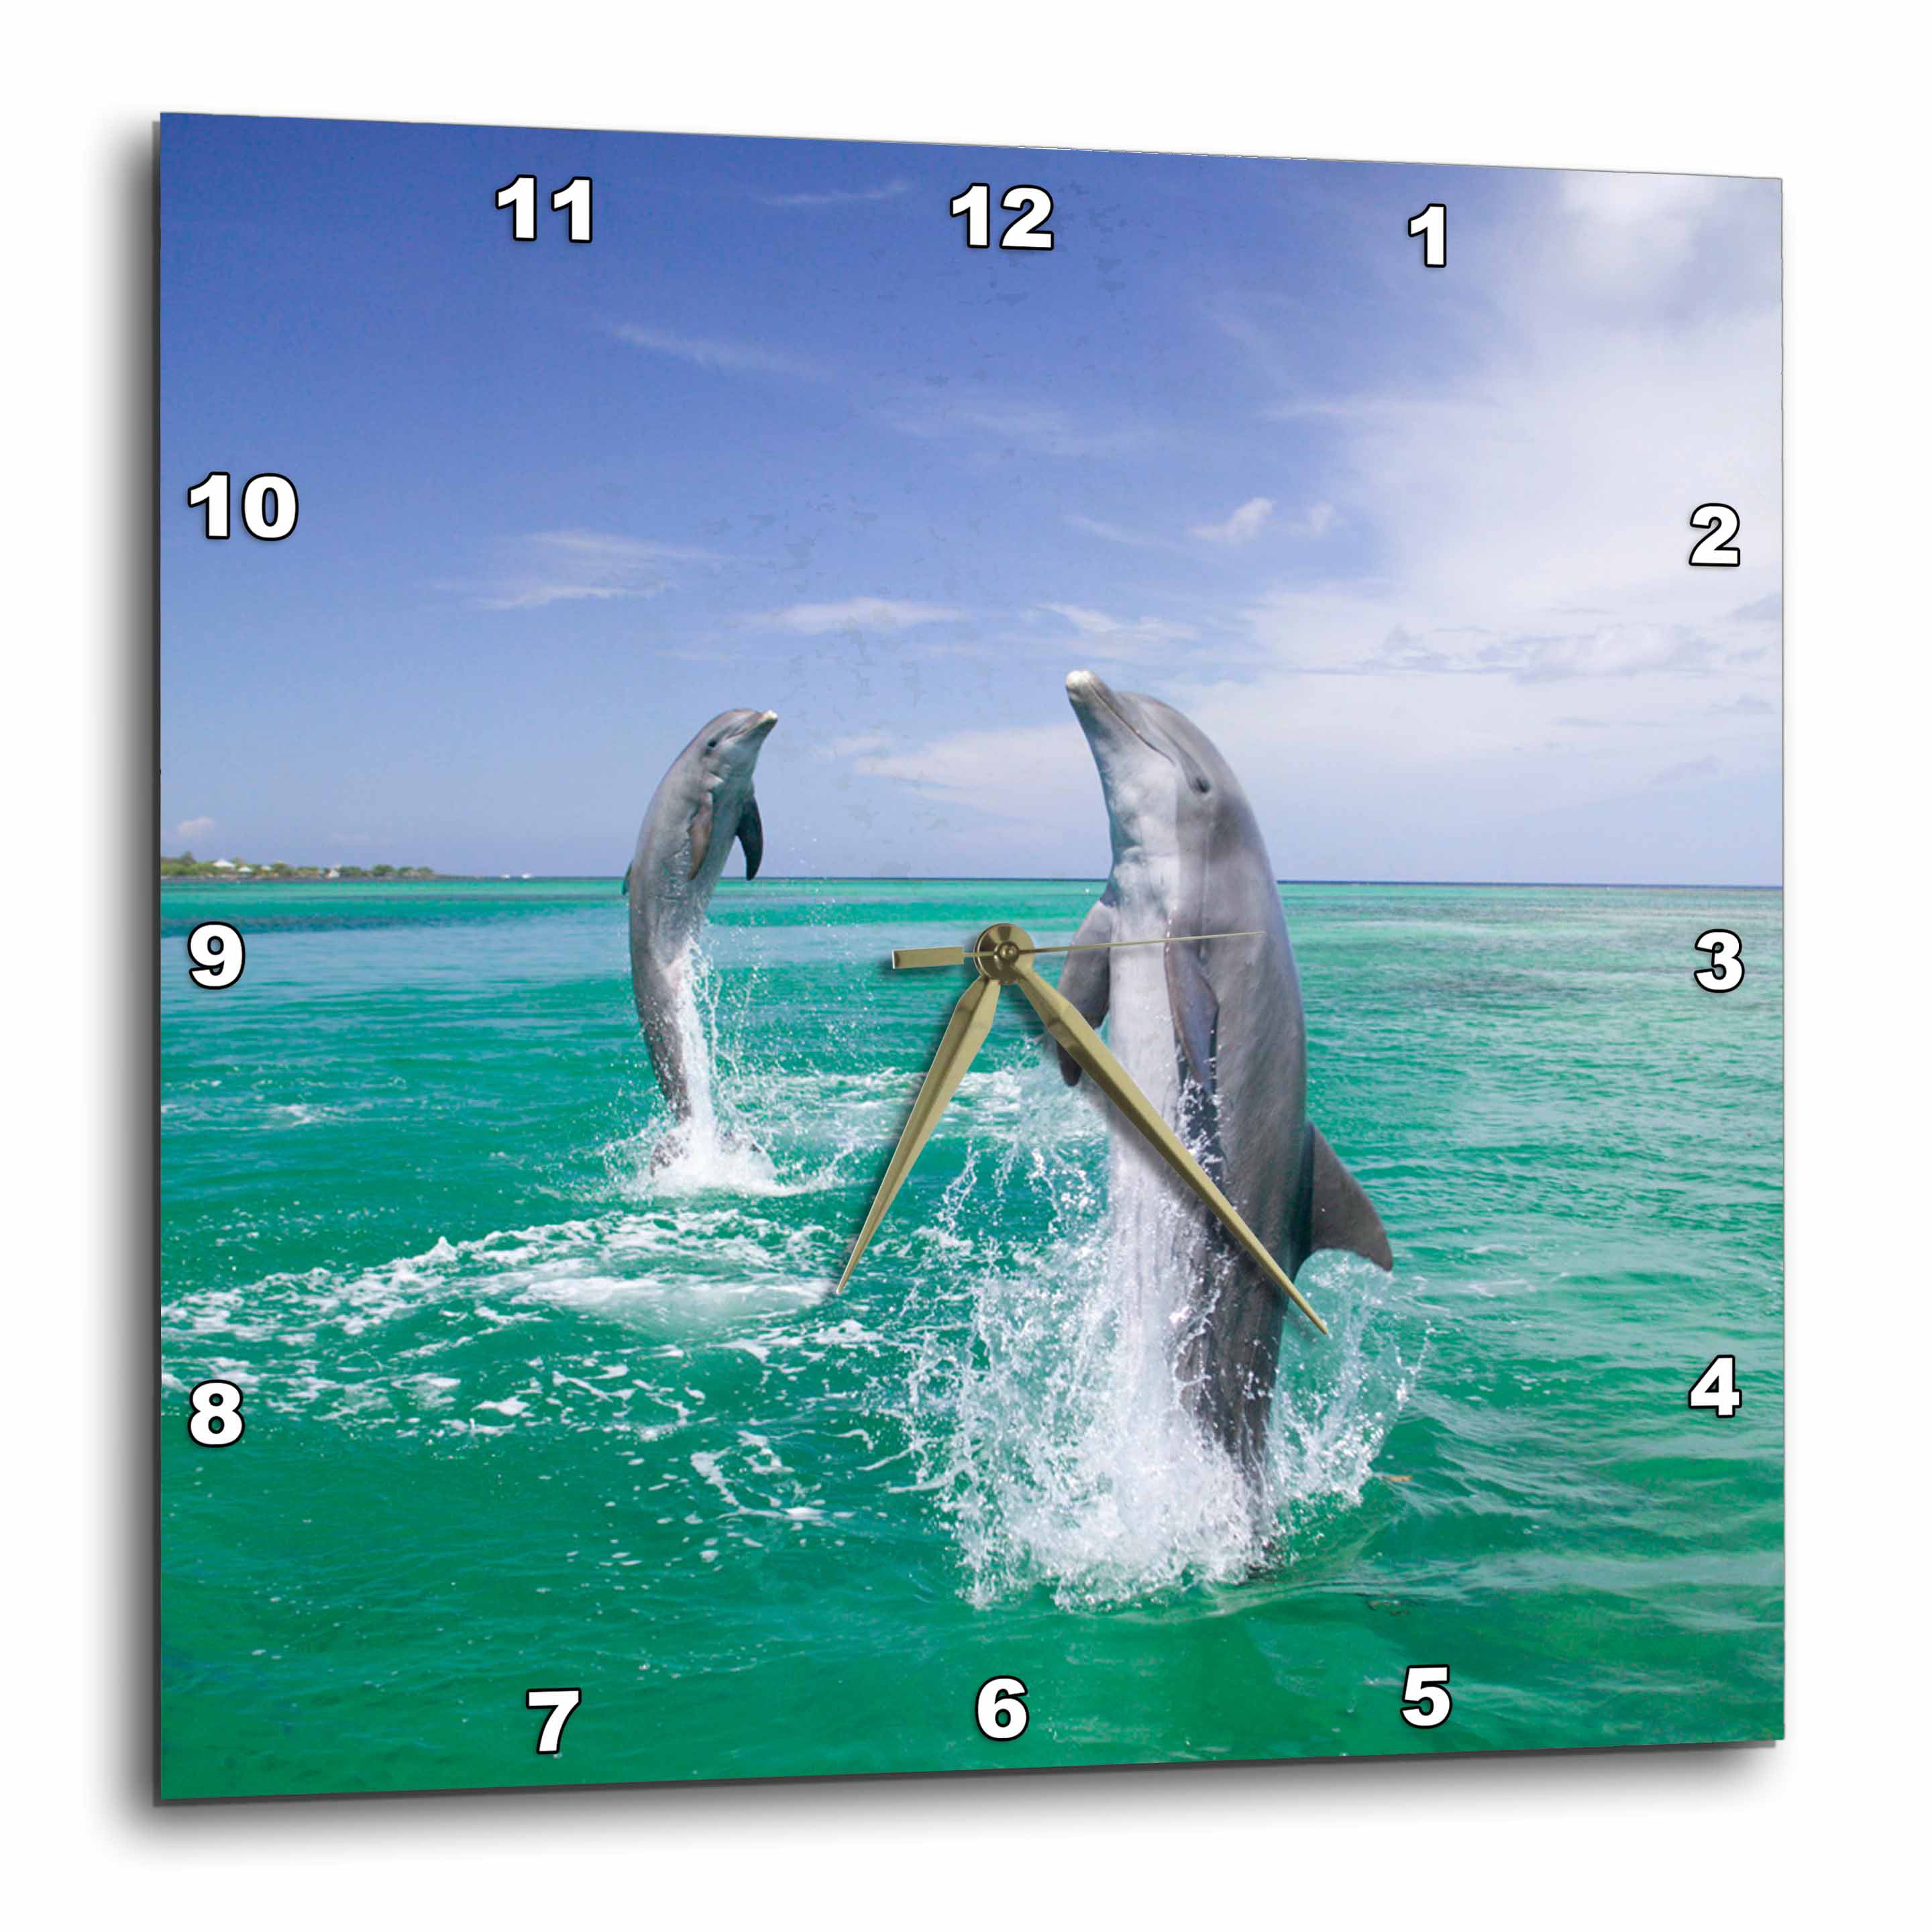 dpp_48980_1 10x10 Wall Clock Dolphin In Atlantis 3dRose Renderly Yours Oceans